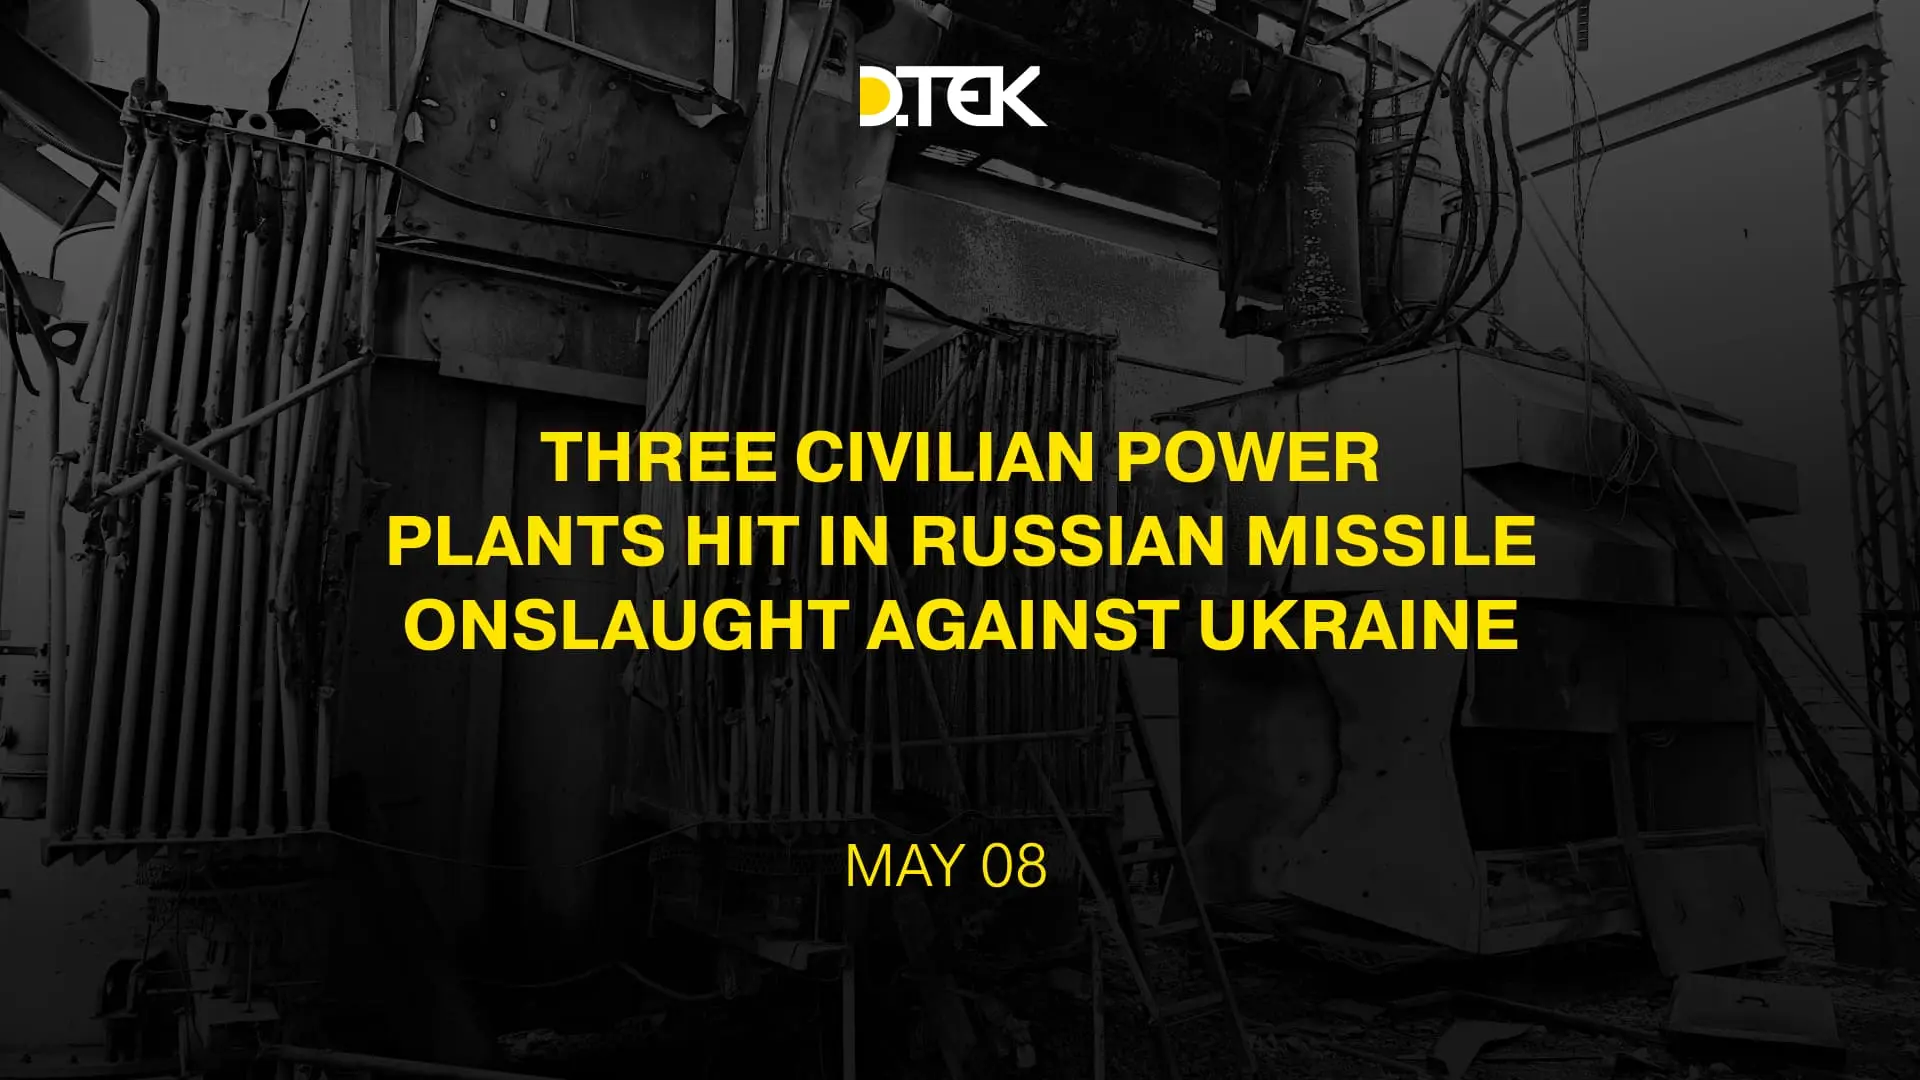 Three civilian power plants hit in russian missile onslaught against Ukraine